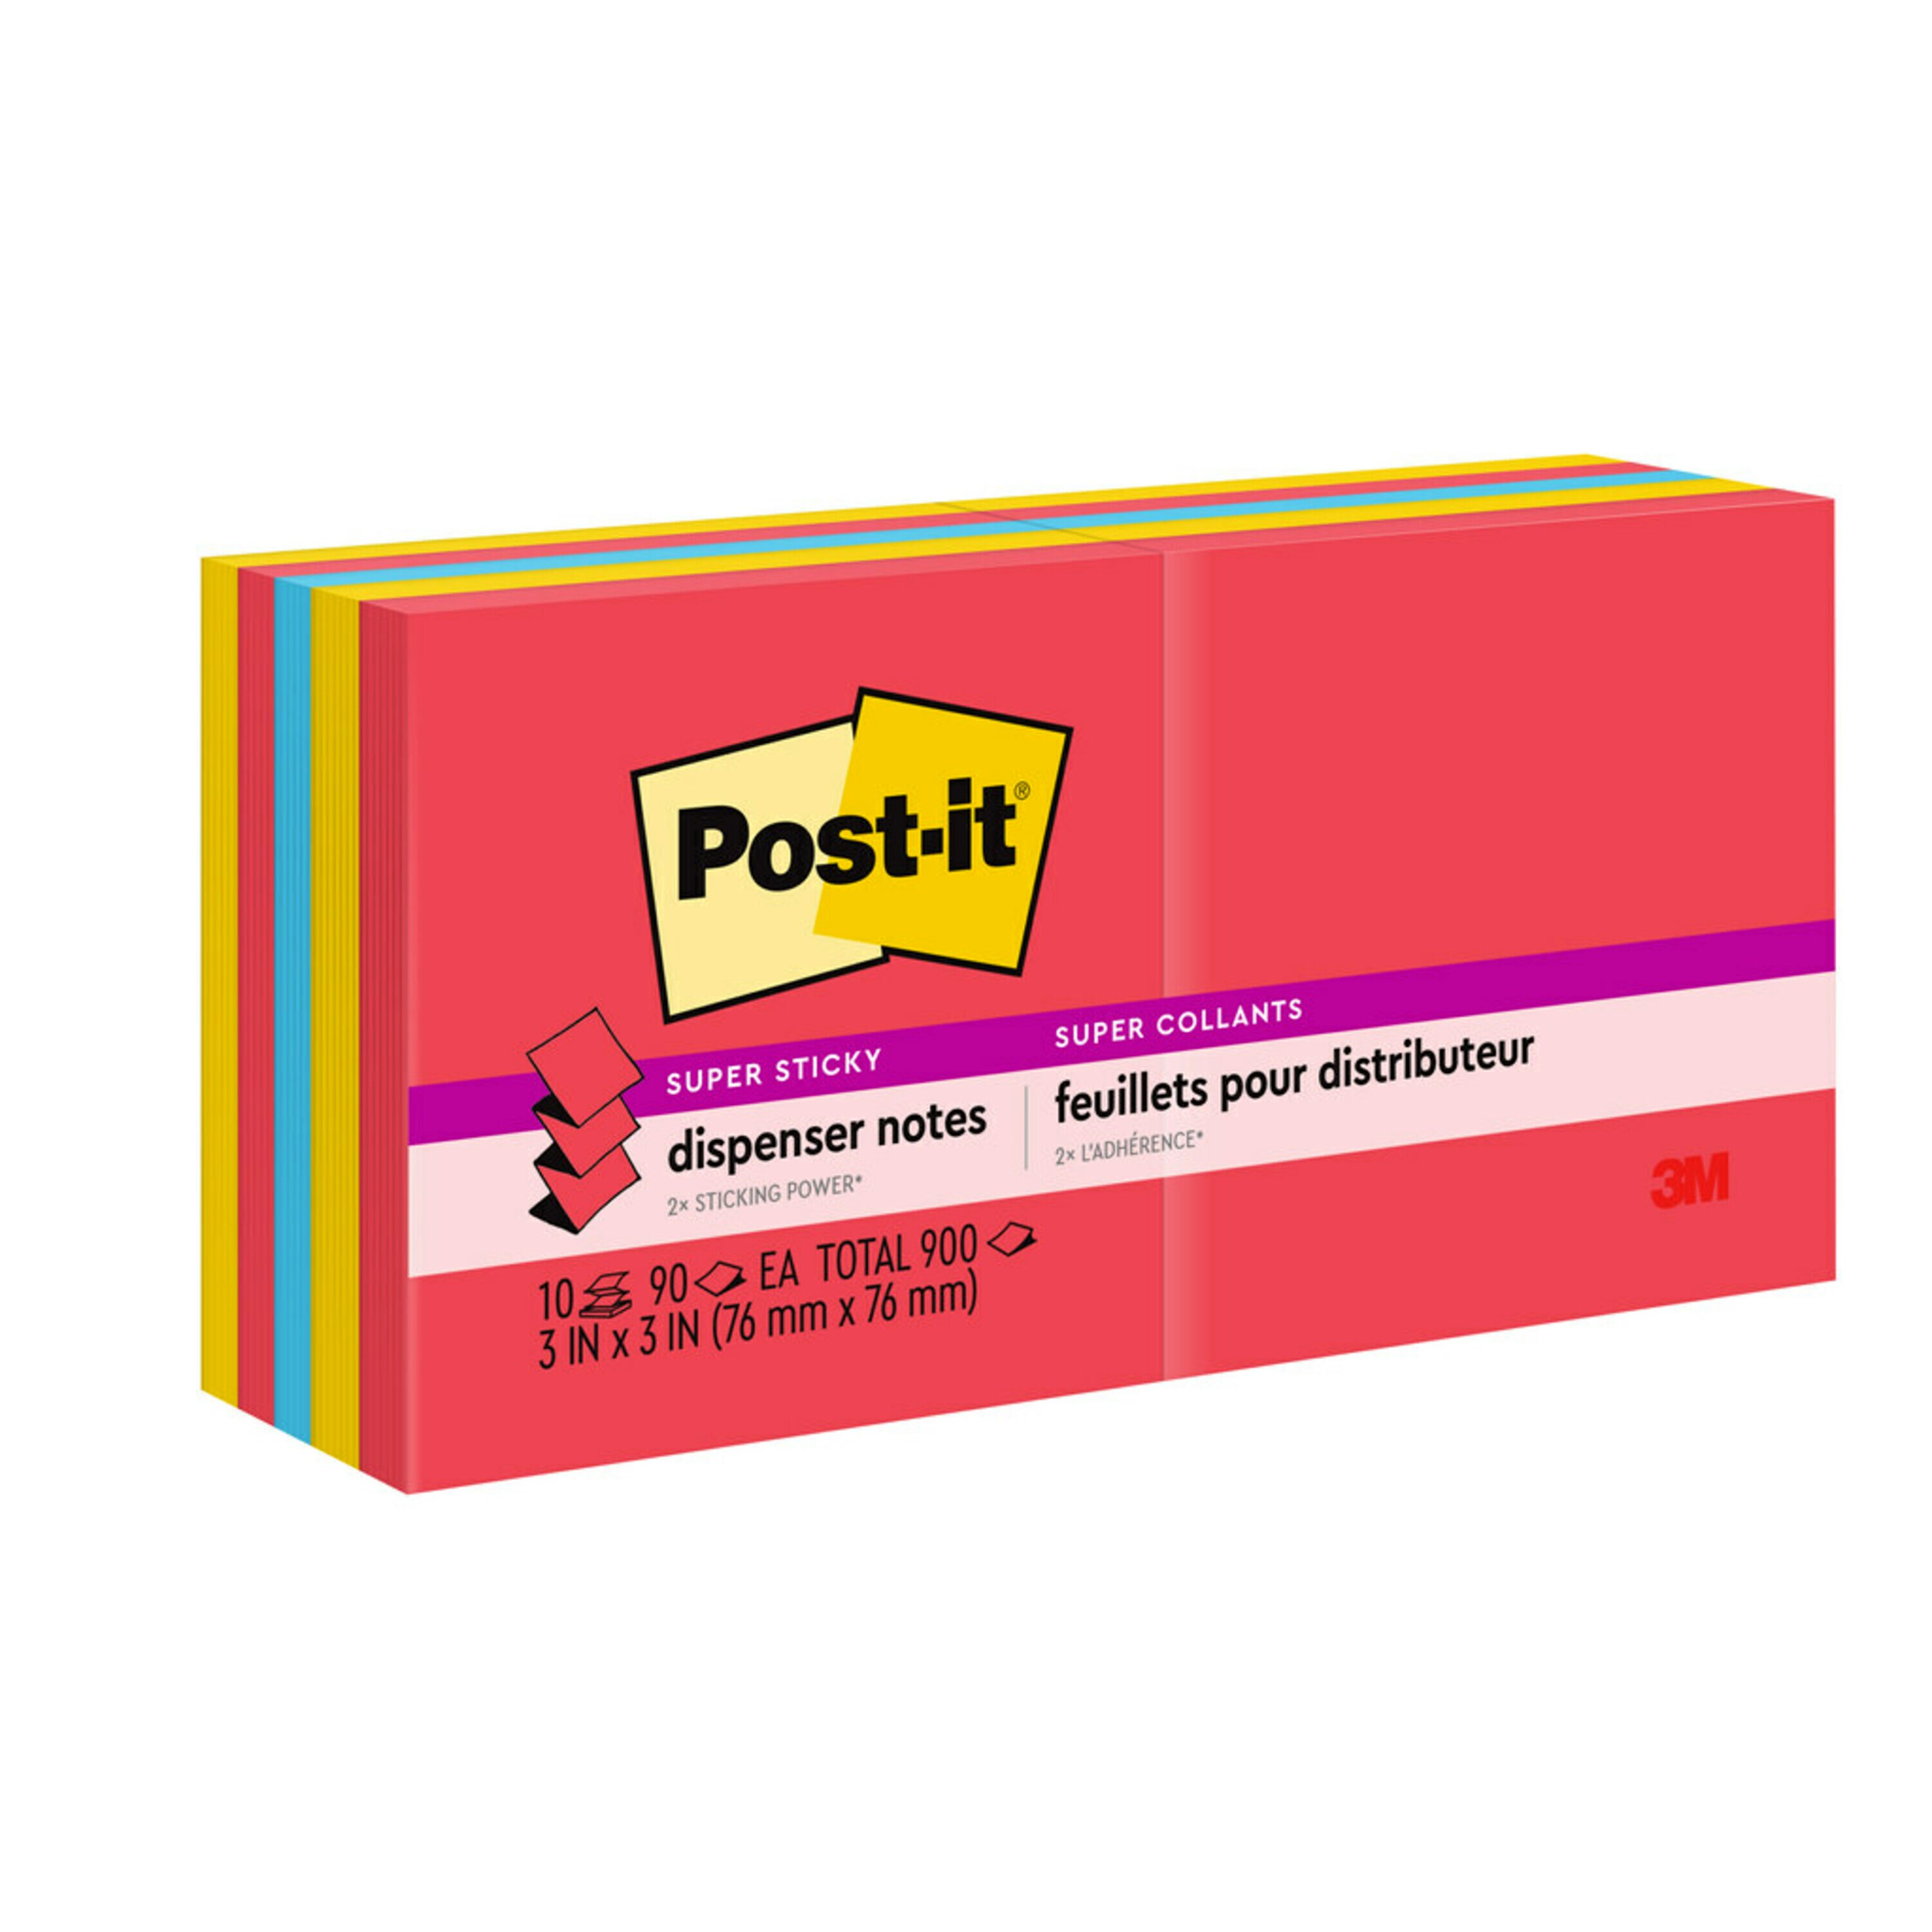 Post-it Super Sticky Dispenser Pop-up Notes, 3 in x 3 in, Playful Primaries, 10 Pads - image 1 of 15